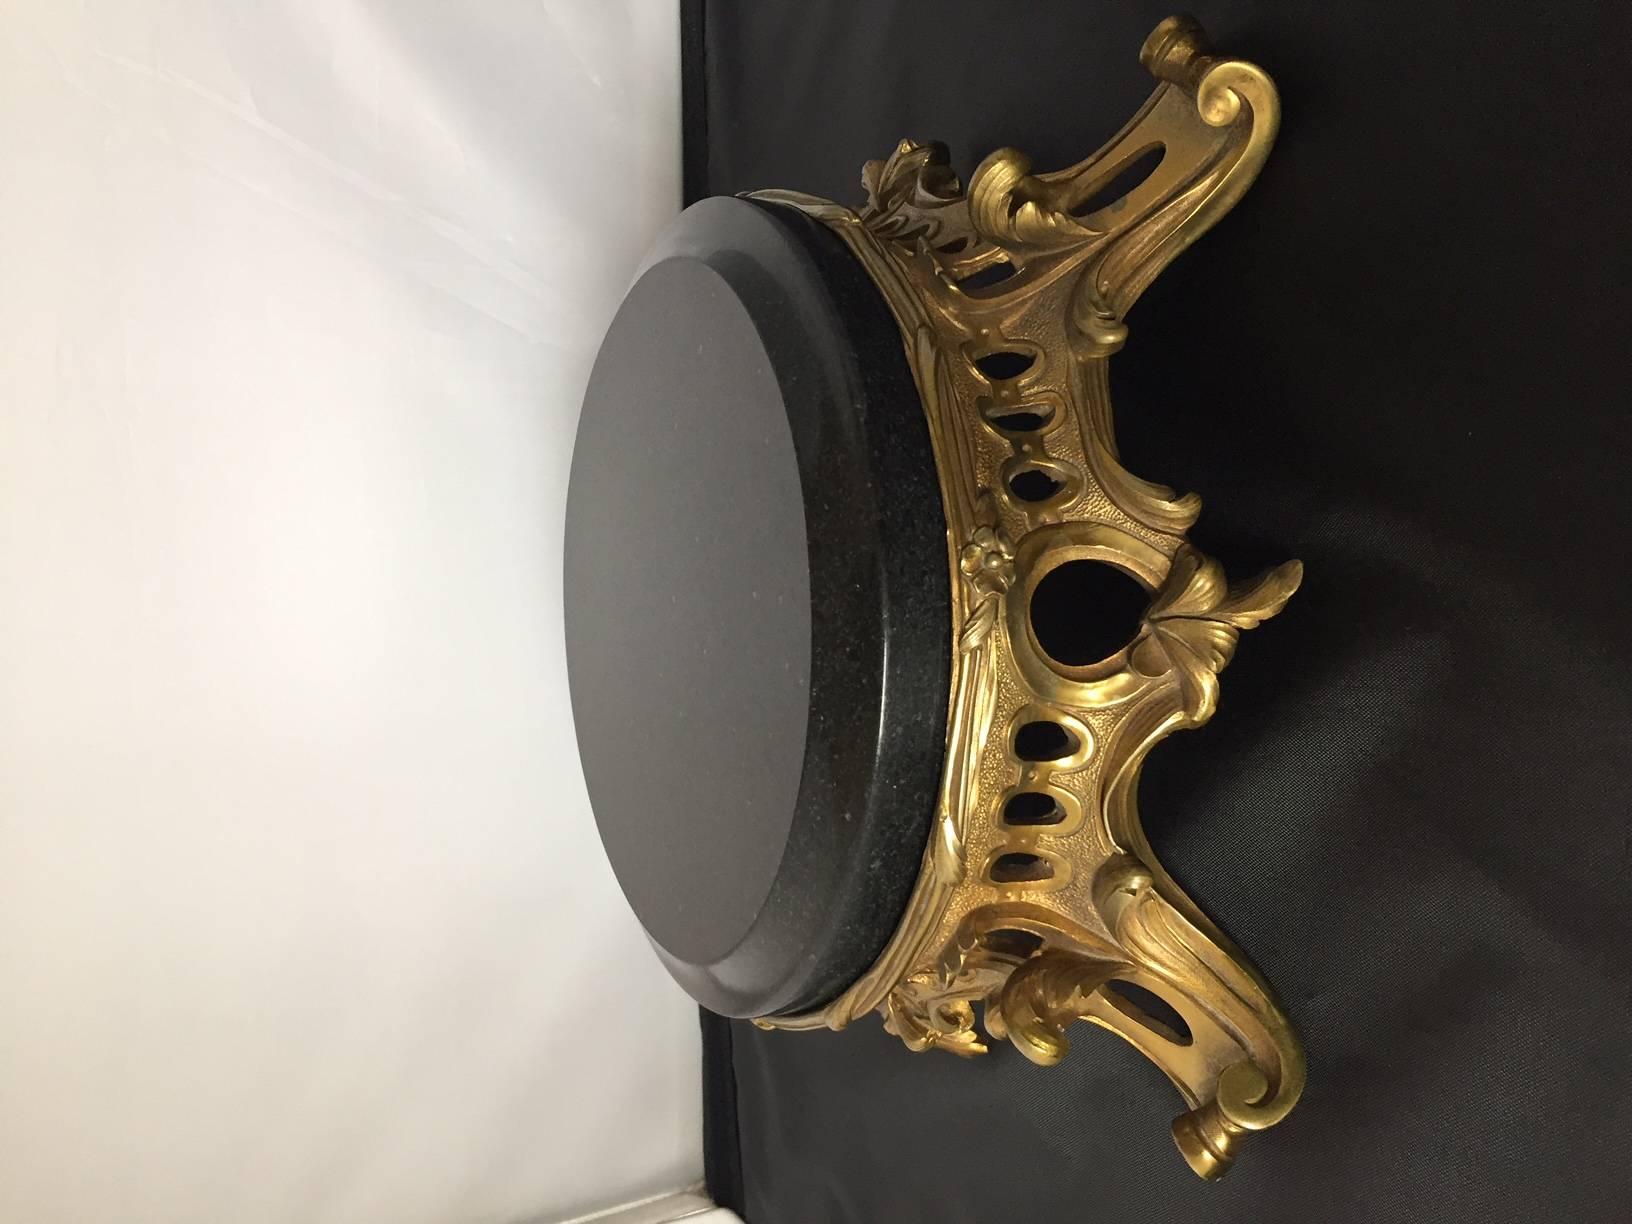 A very fine French Ormolu centerpiece crisply cast and chased retaining its original gold in fantastic condition with a black marble top.